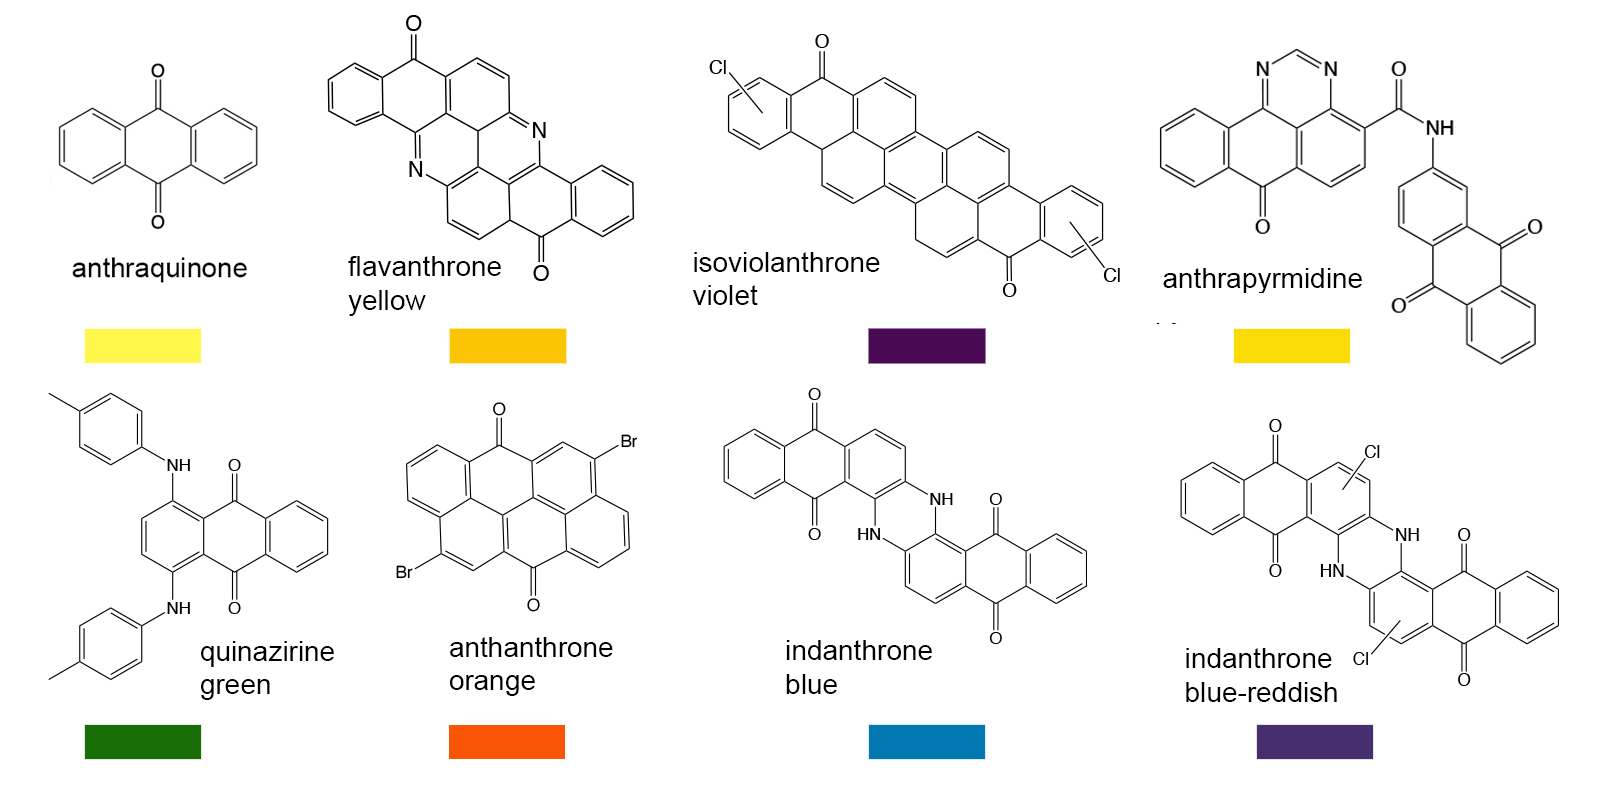 Anthraquinone dyes